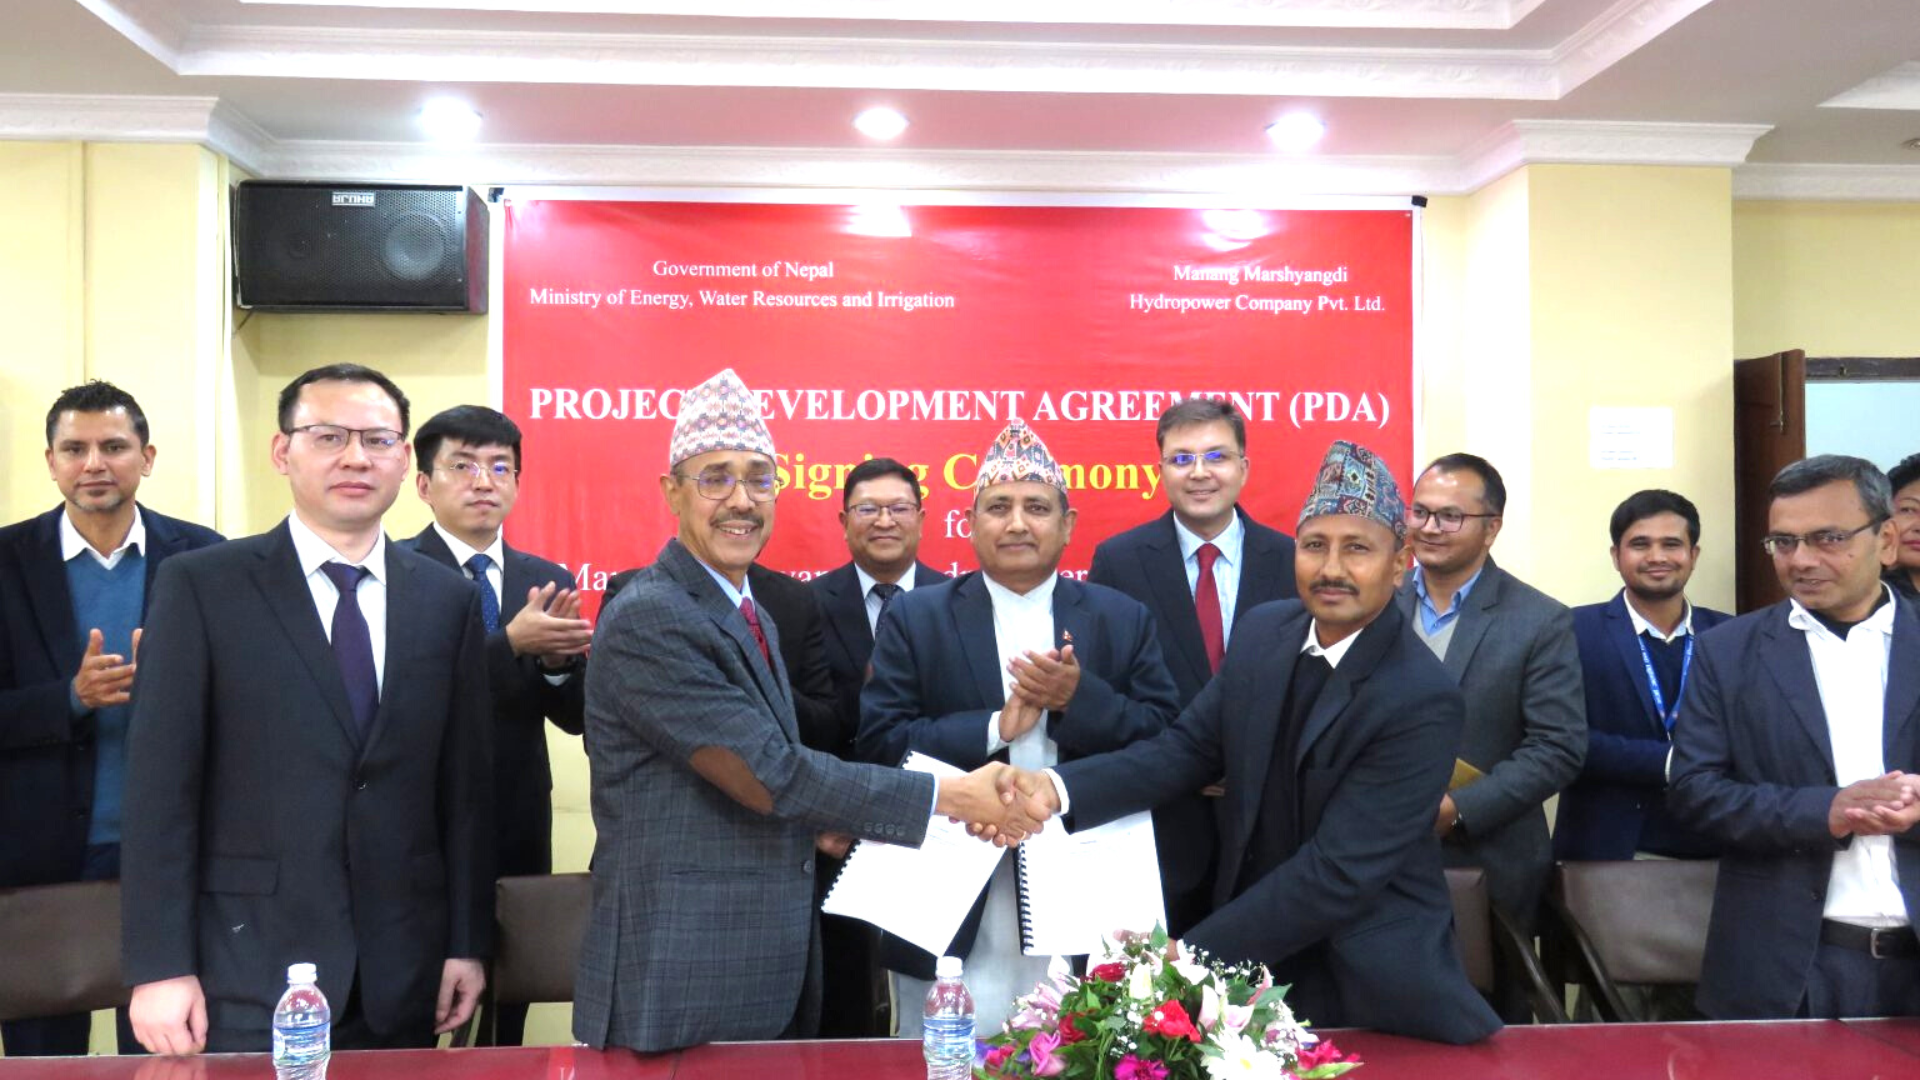 First PDA of Hydropower Project with Chinese Company